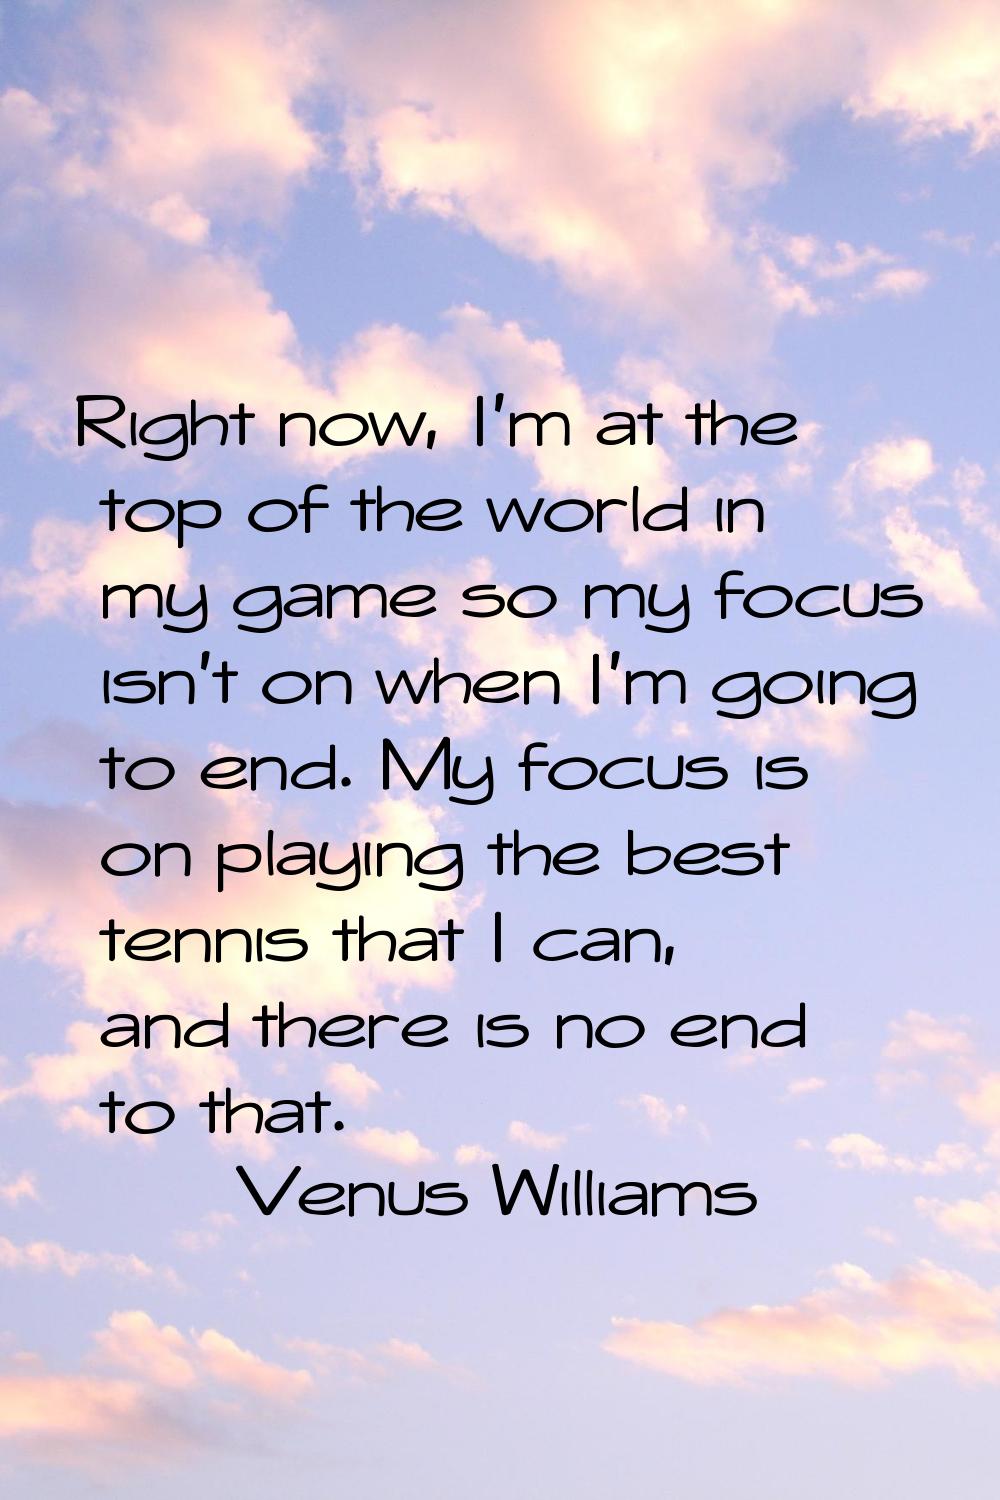 Right now, I'm at the top of the world in my game so my focus isn't on when I'm going to end. My fo